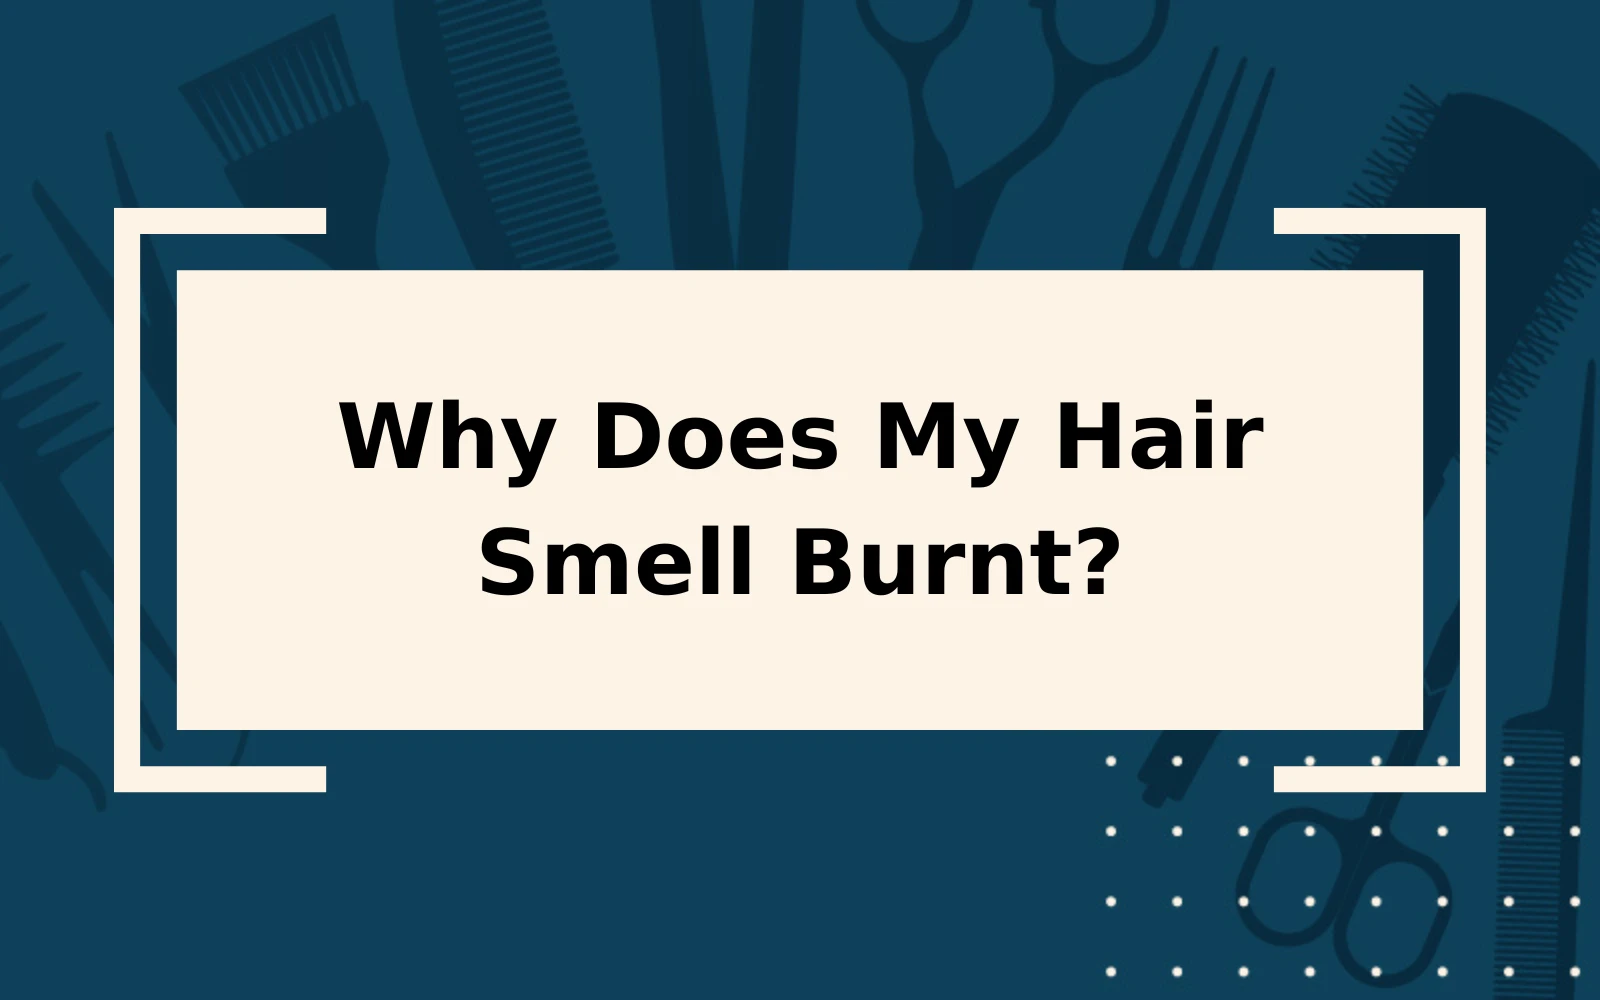 Why Does My Hair Smell Burnt? | The Real Cause & Solutions